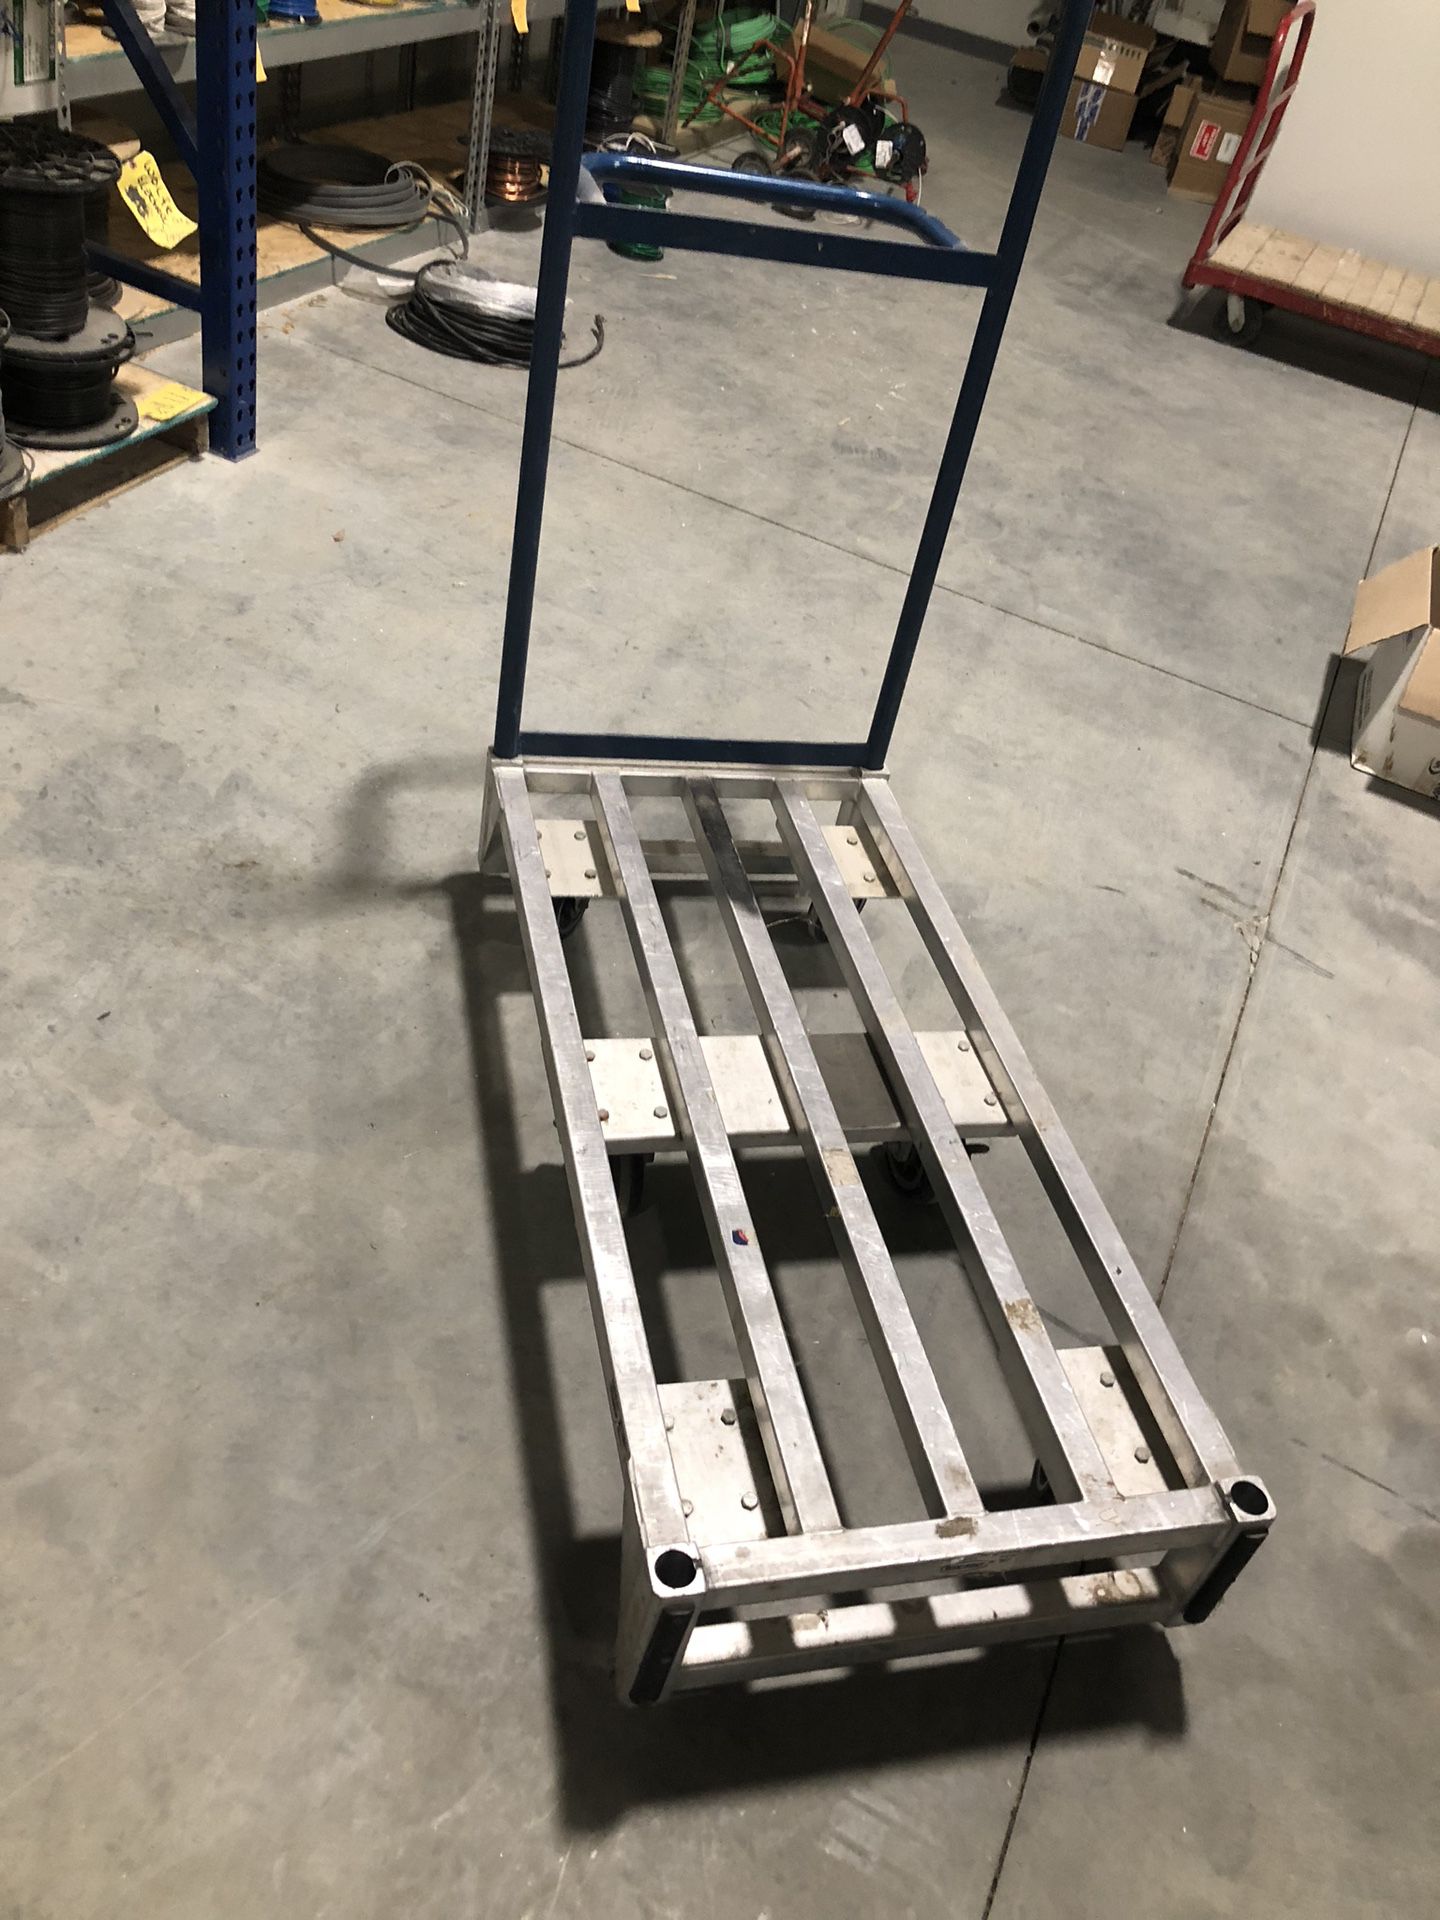 300 plus in value warehouse cart totally discounted , need $60 bucks for need to sell ASAP